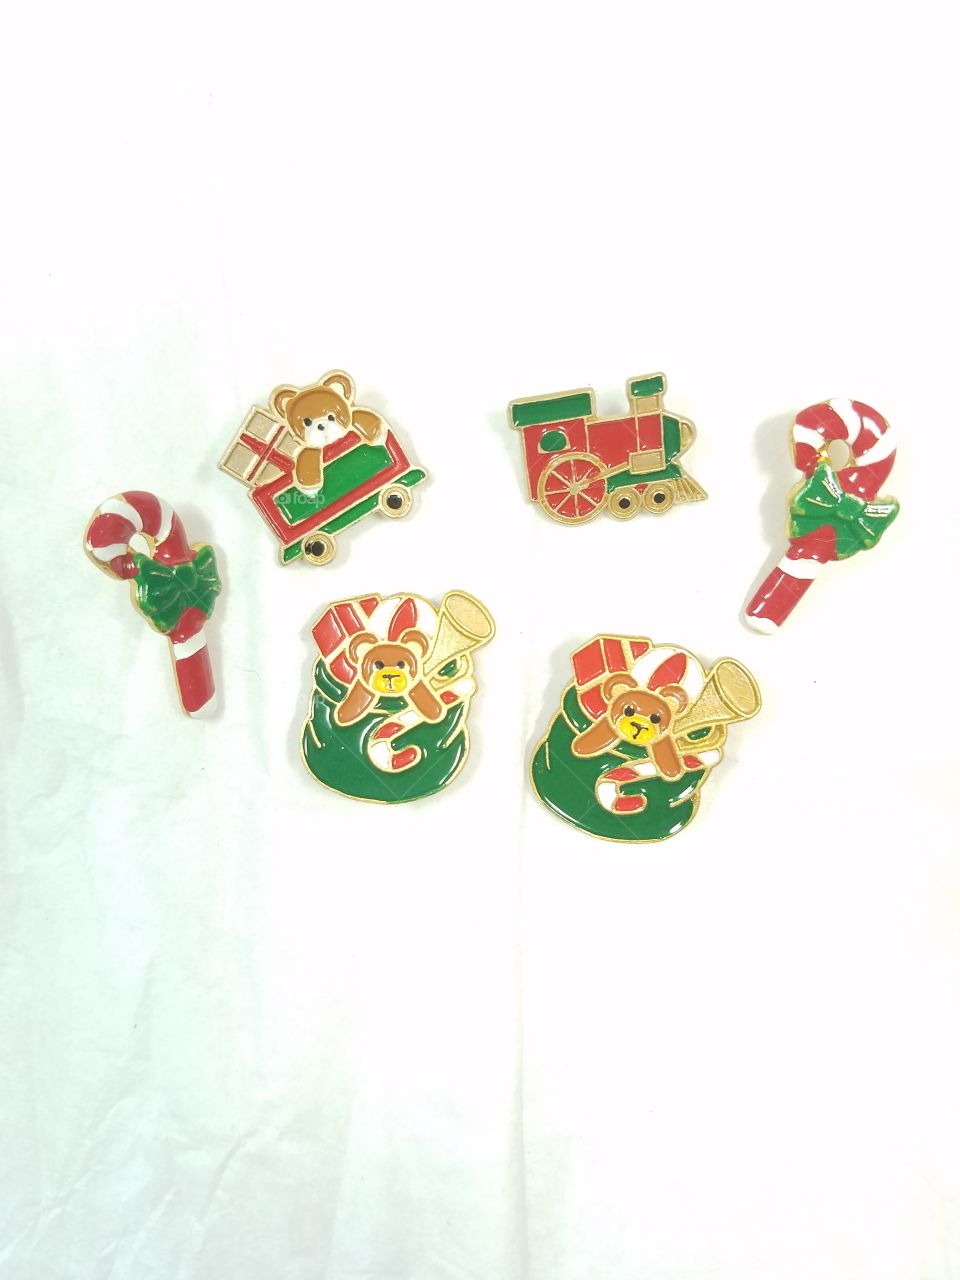 Vintage Christmas buttons